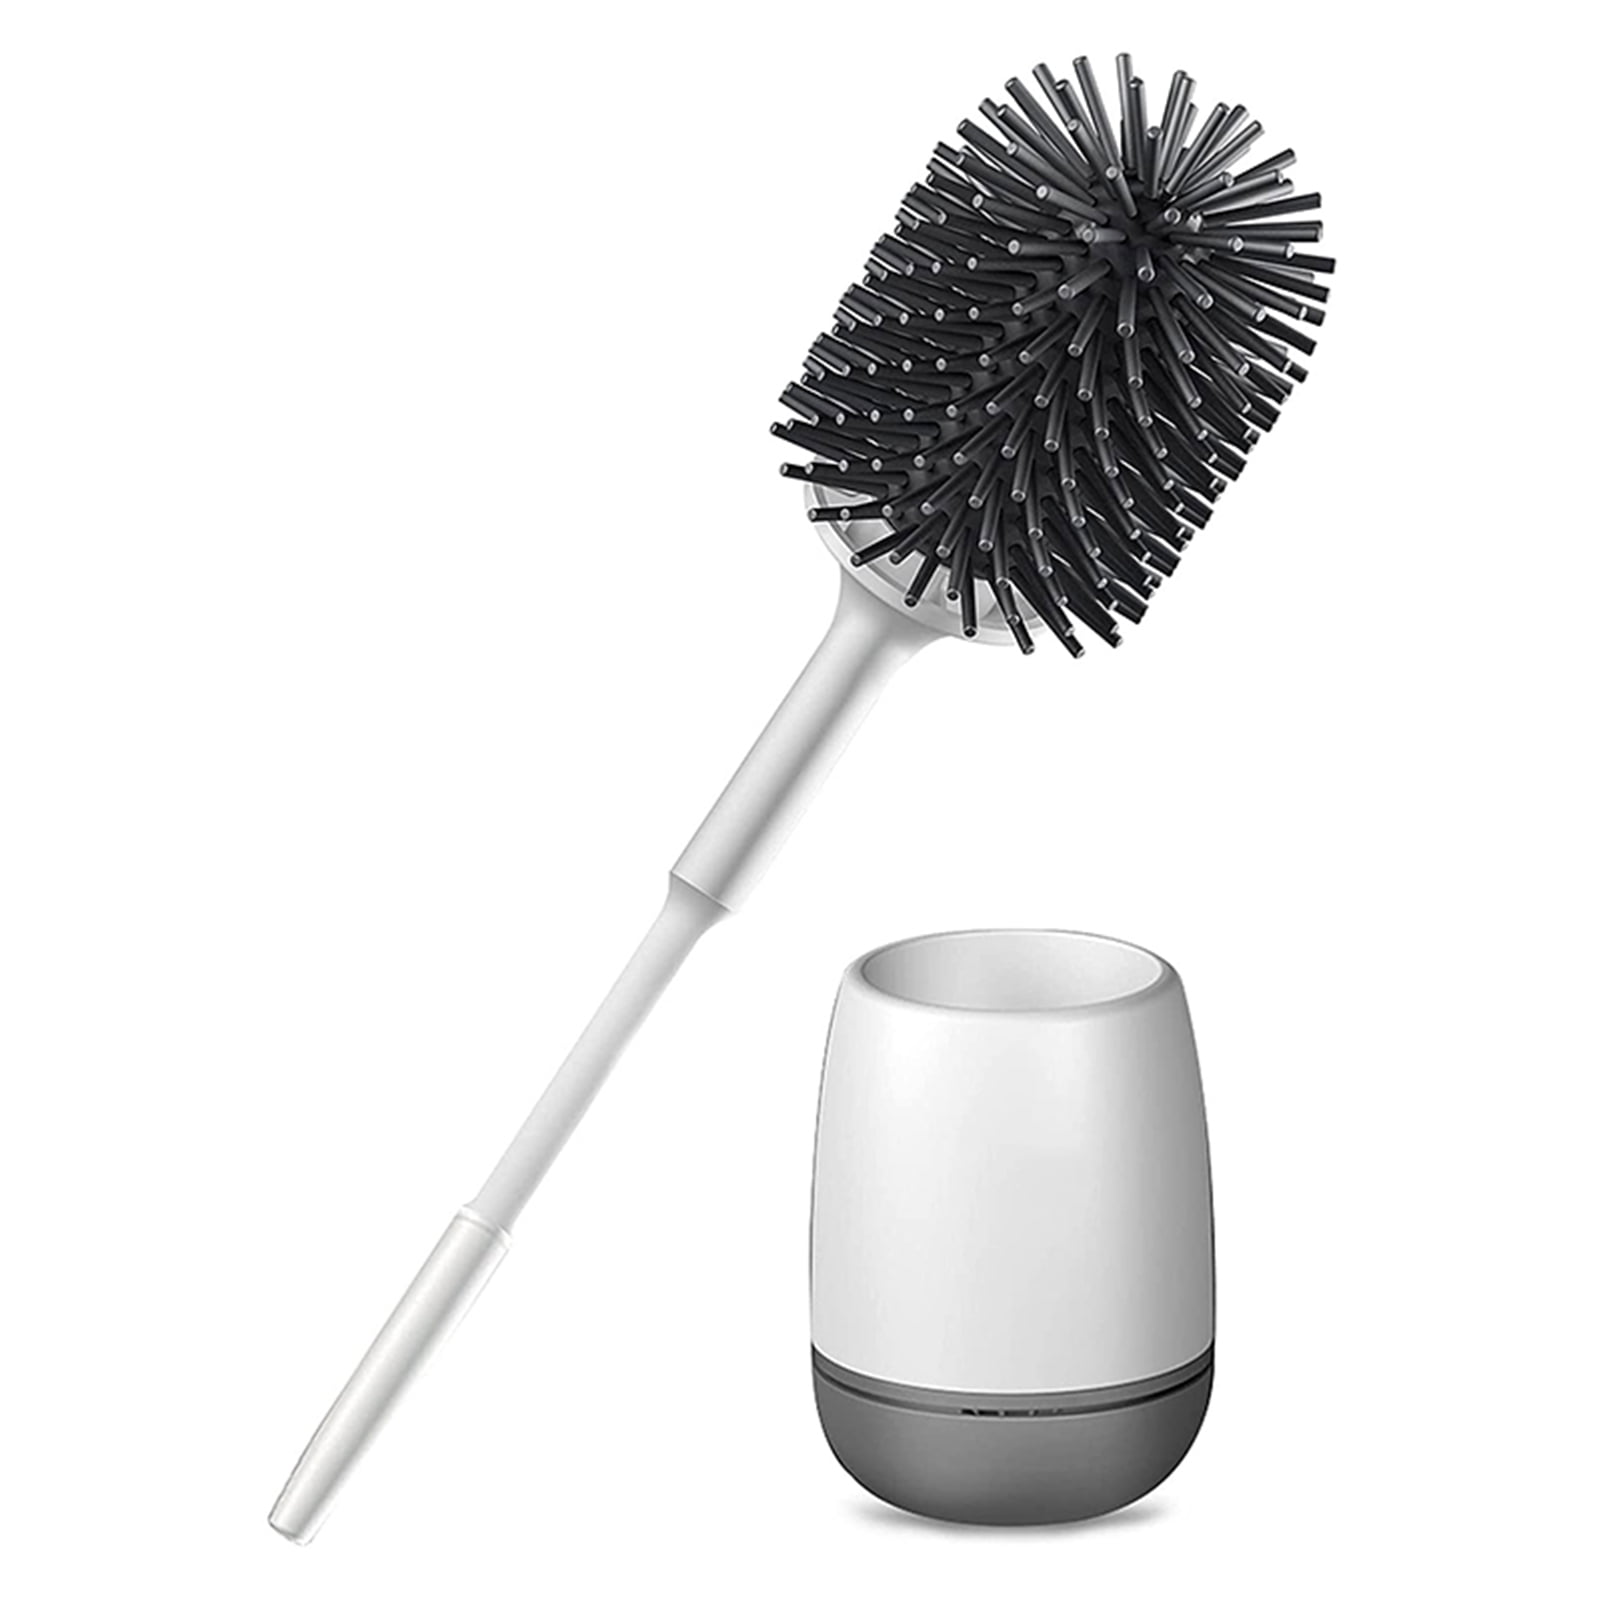 Resistant Bronze Toilet Brush Holder with Lid Perfect Bathroom Bowl Cleaning Set 